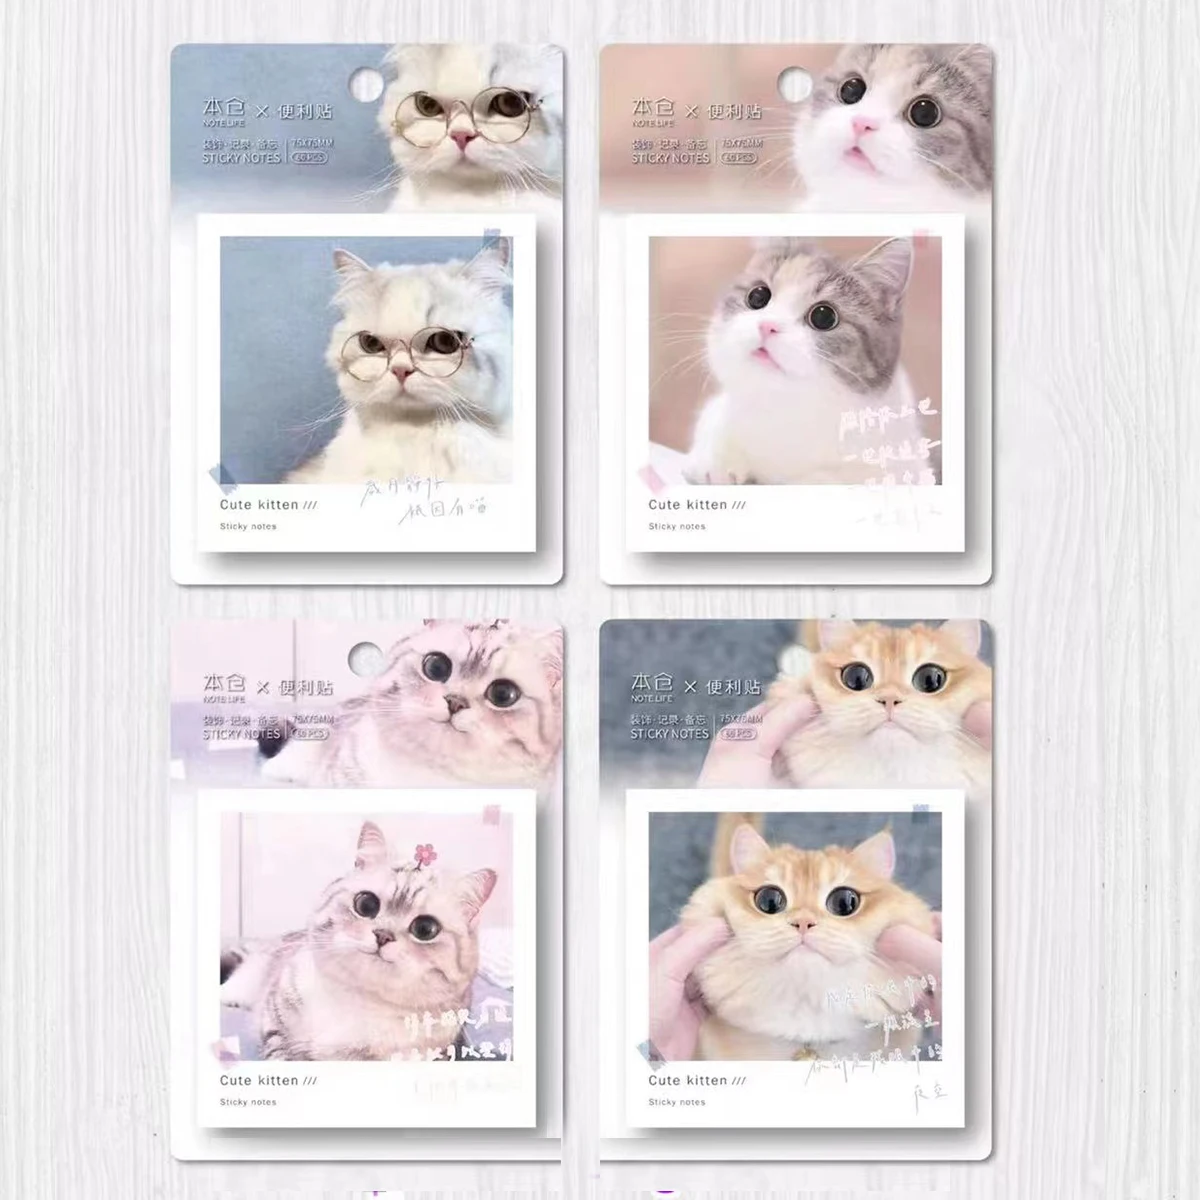 60 Sheets Kawaii Cat Sticky Notes Memo Pad Student Stationery School Office Supply N Times Sticky Cartoon Self-stick Memo Note